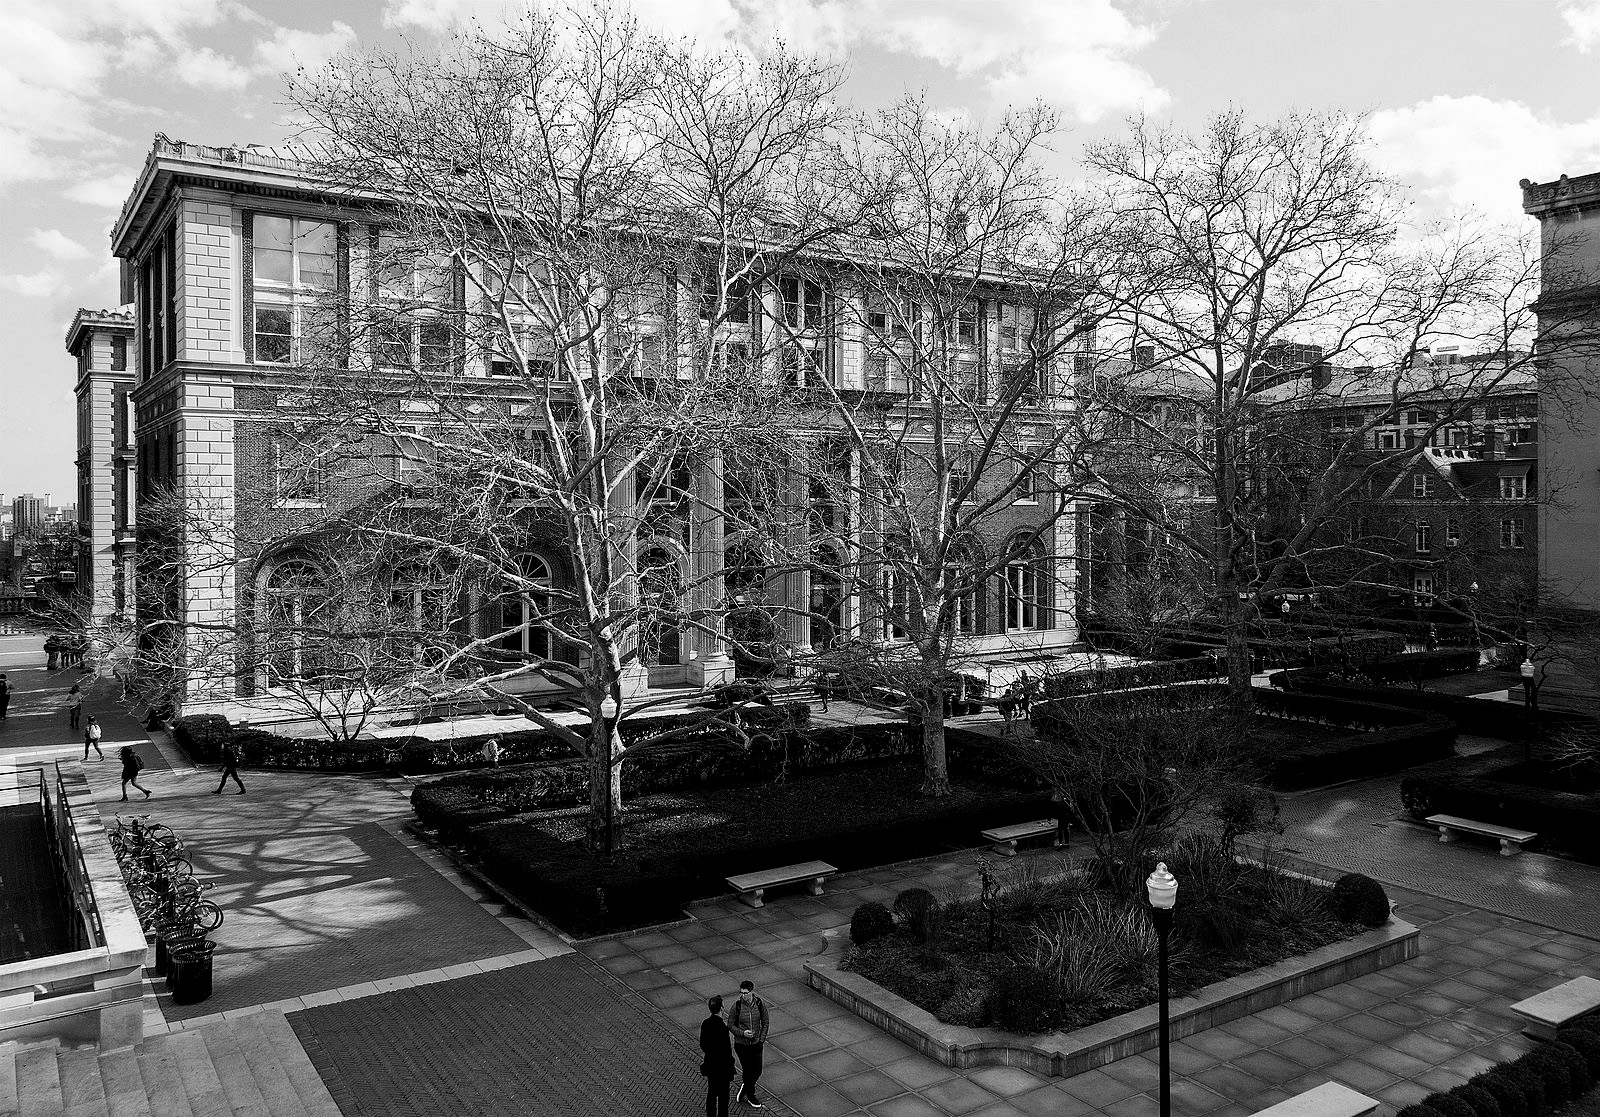 Black and white photo of Avery Hall at Columbia University, a historic building with classical architecture, where Norma Sklarek, a pioneering African American architect, once studied. The image captures the hall's grandeur, framed by leafless trees and a serene courtyard, with students and faculty members walking by, illustrating the vibrant academic life within.